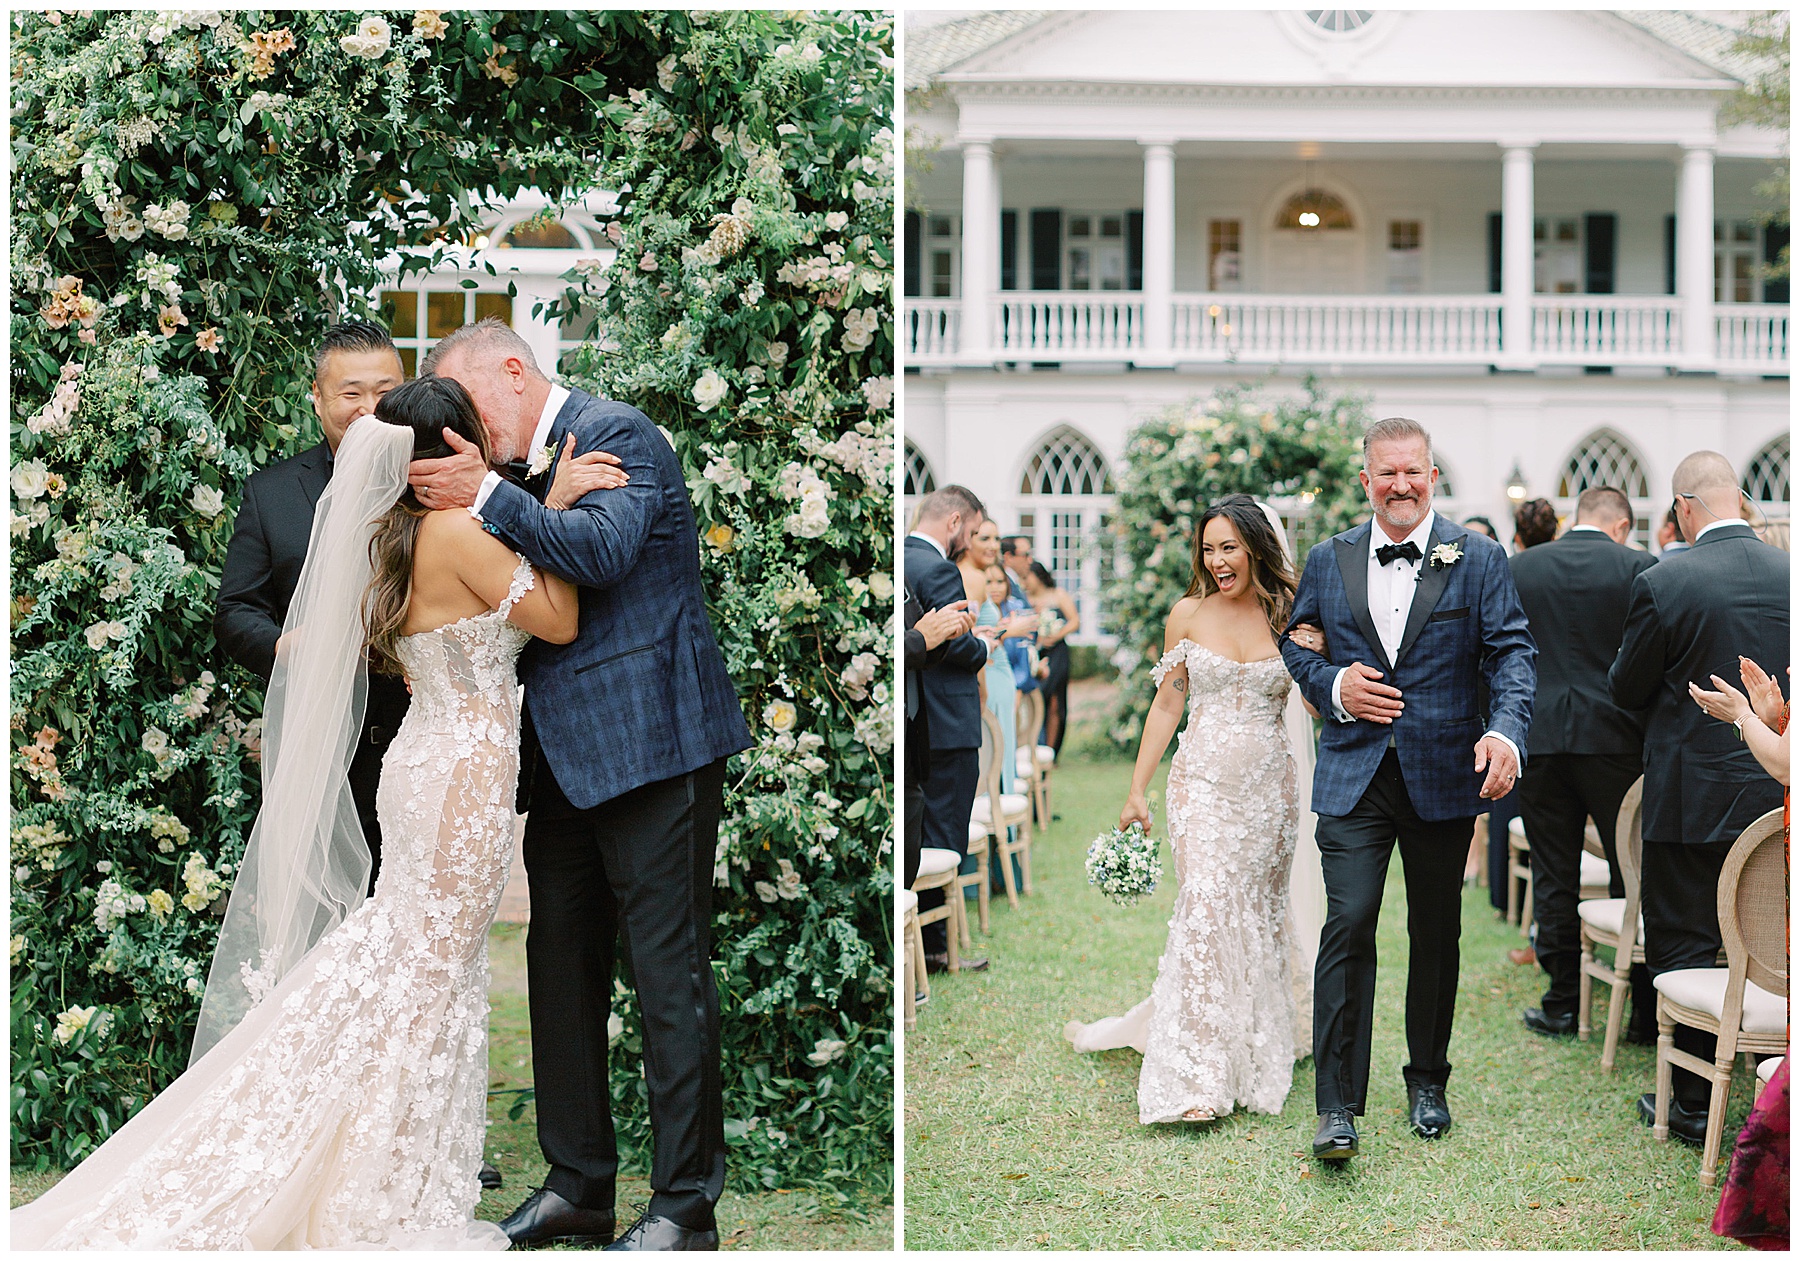 newlyweds kiss and walk up aisle on lawn at Lowndes Grove